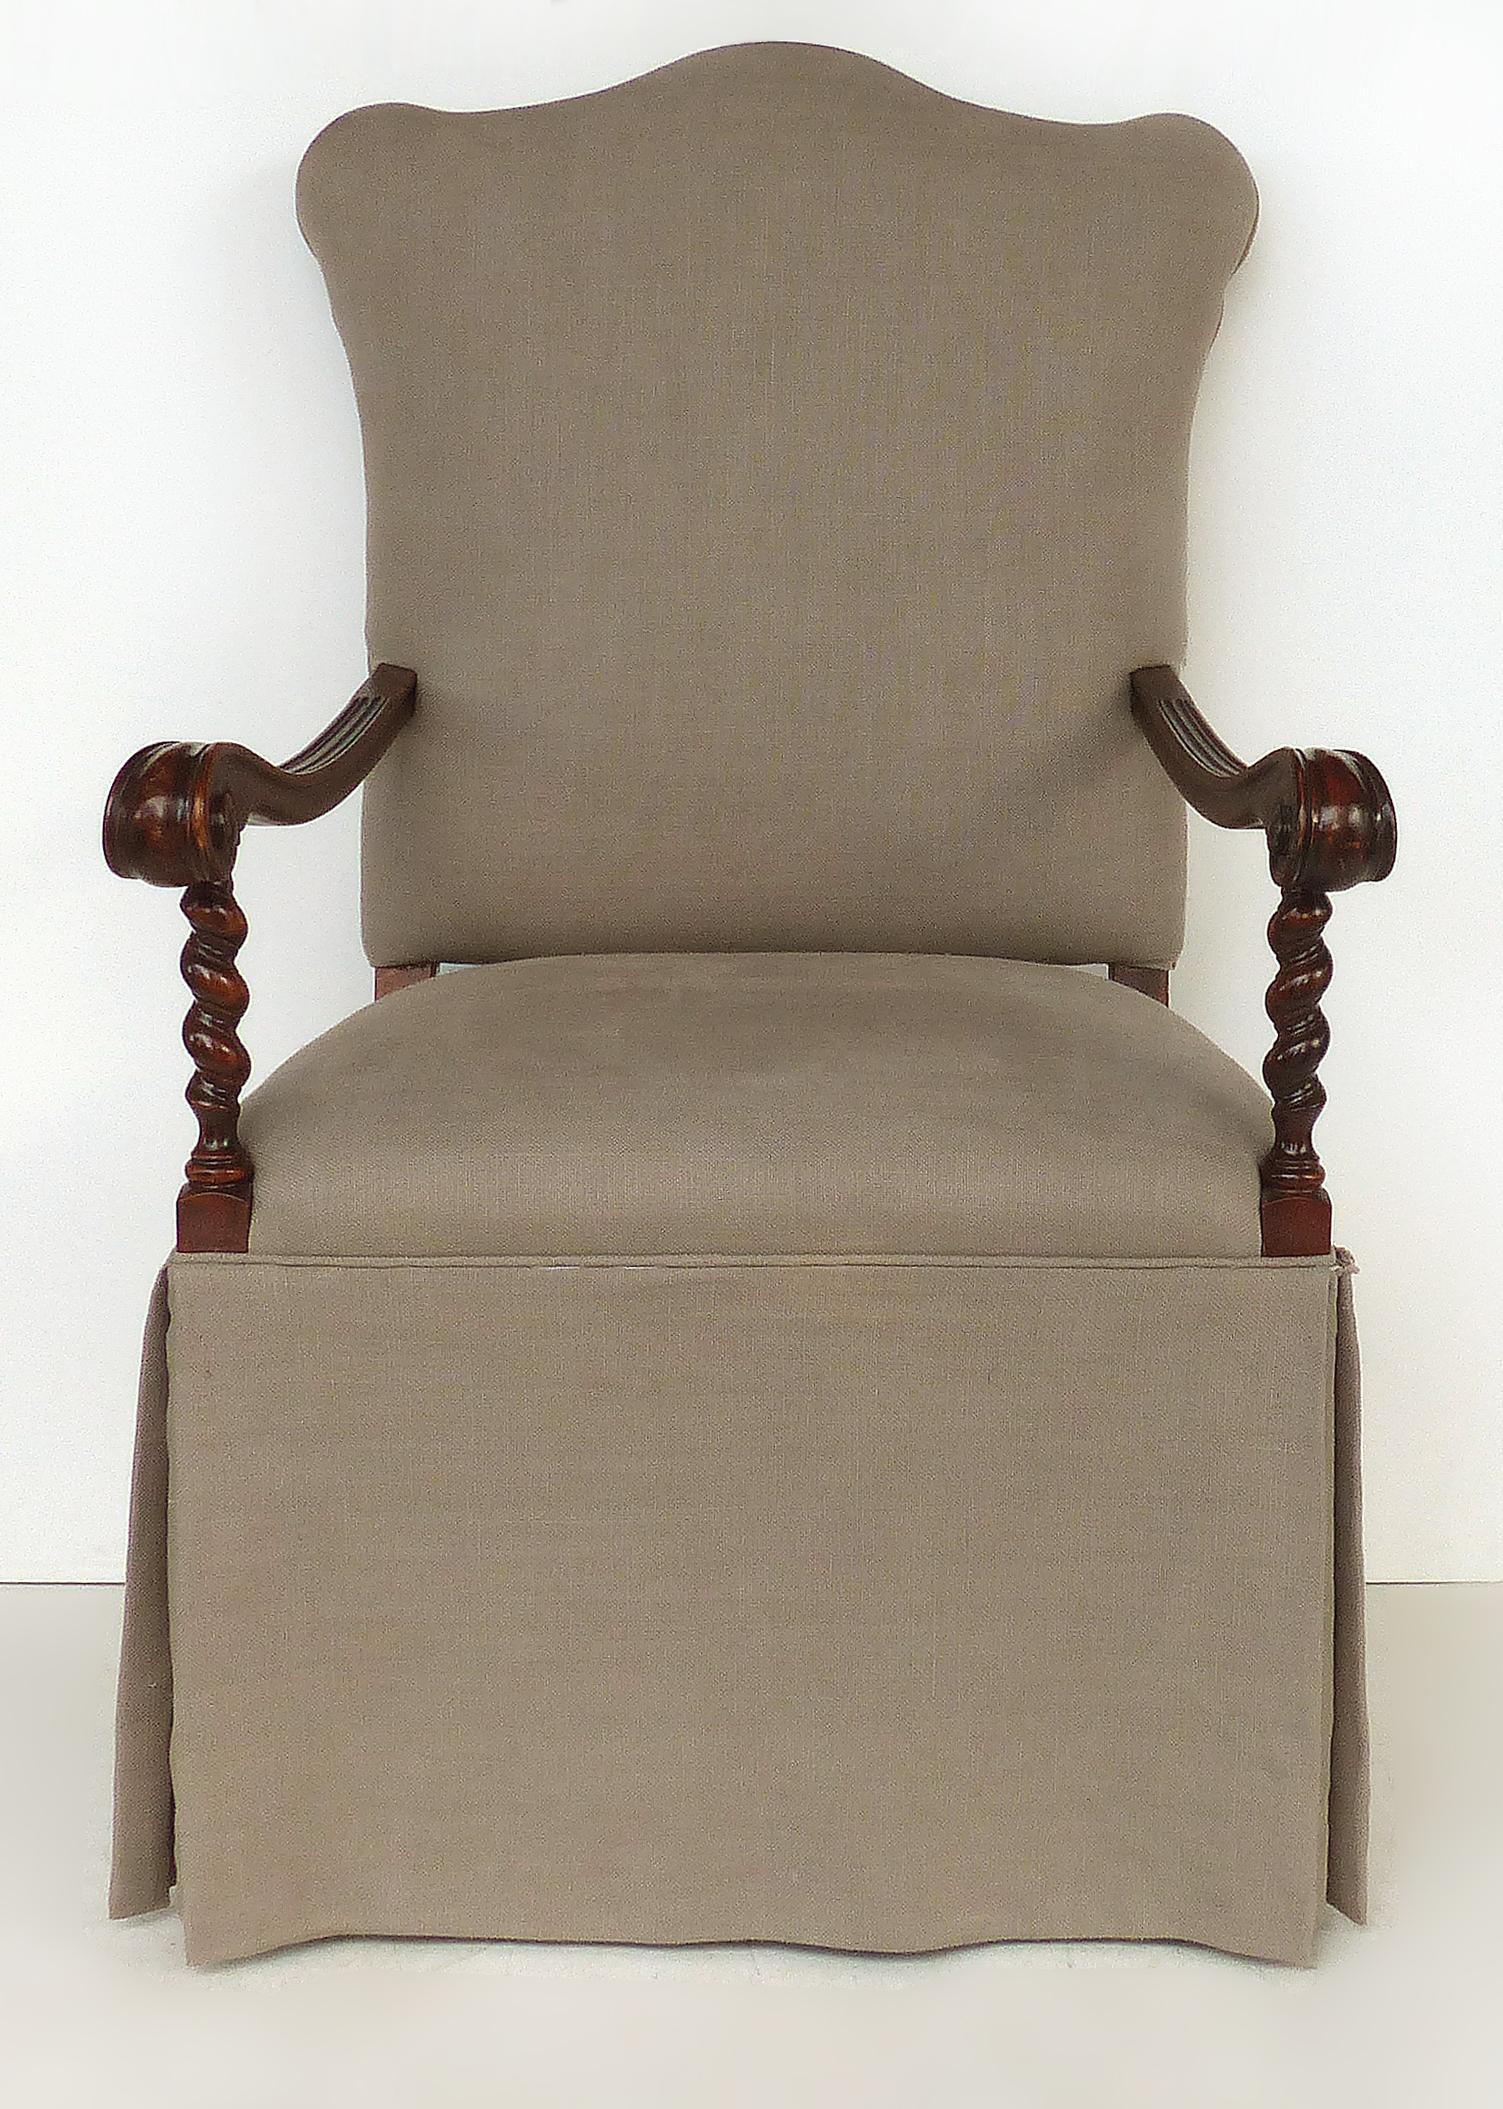 Carved barley twist armchair, upholstered seat and back

Offered for sale is an armchair with a carved turned barley twist frame. The carving is opposing or handed. The seat and back have been upholstered with a slipcovered look. There is some